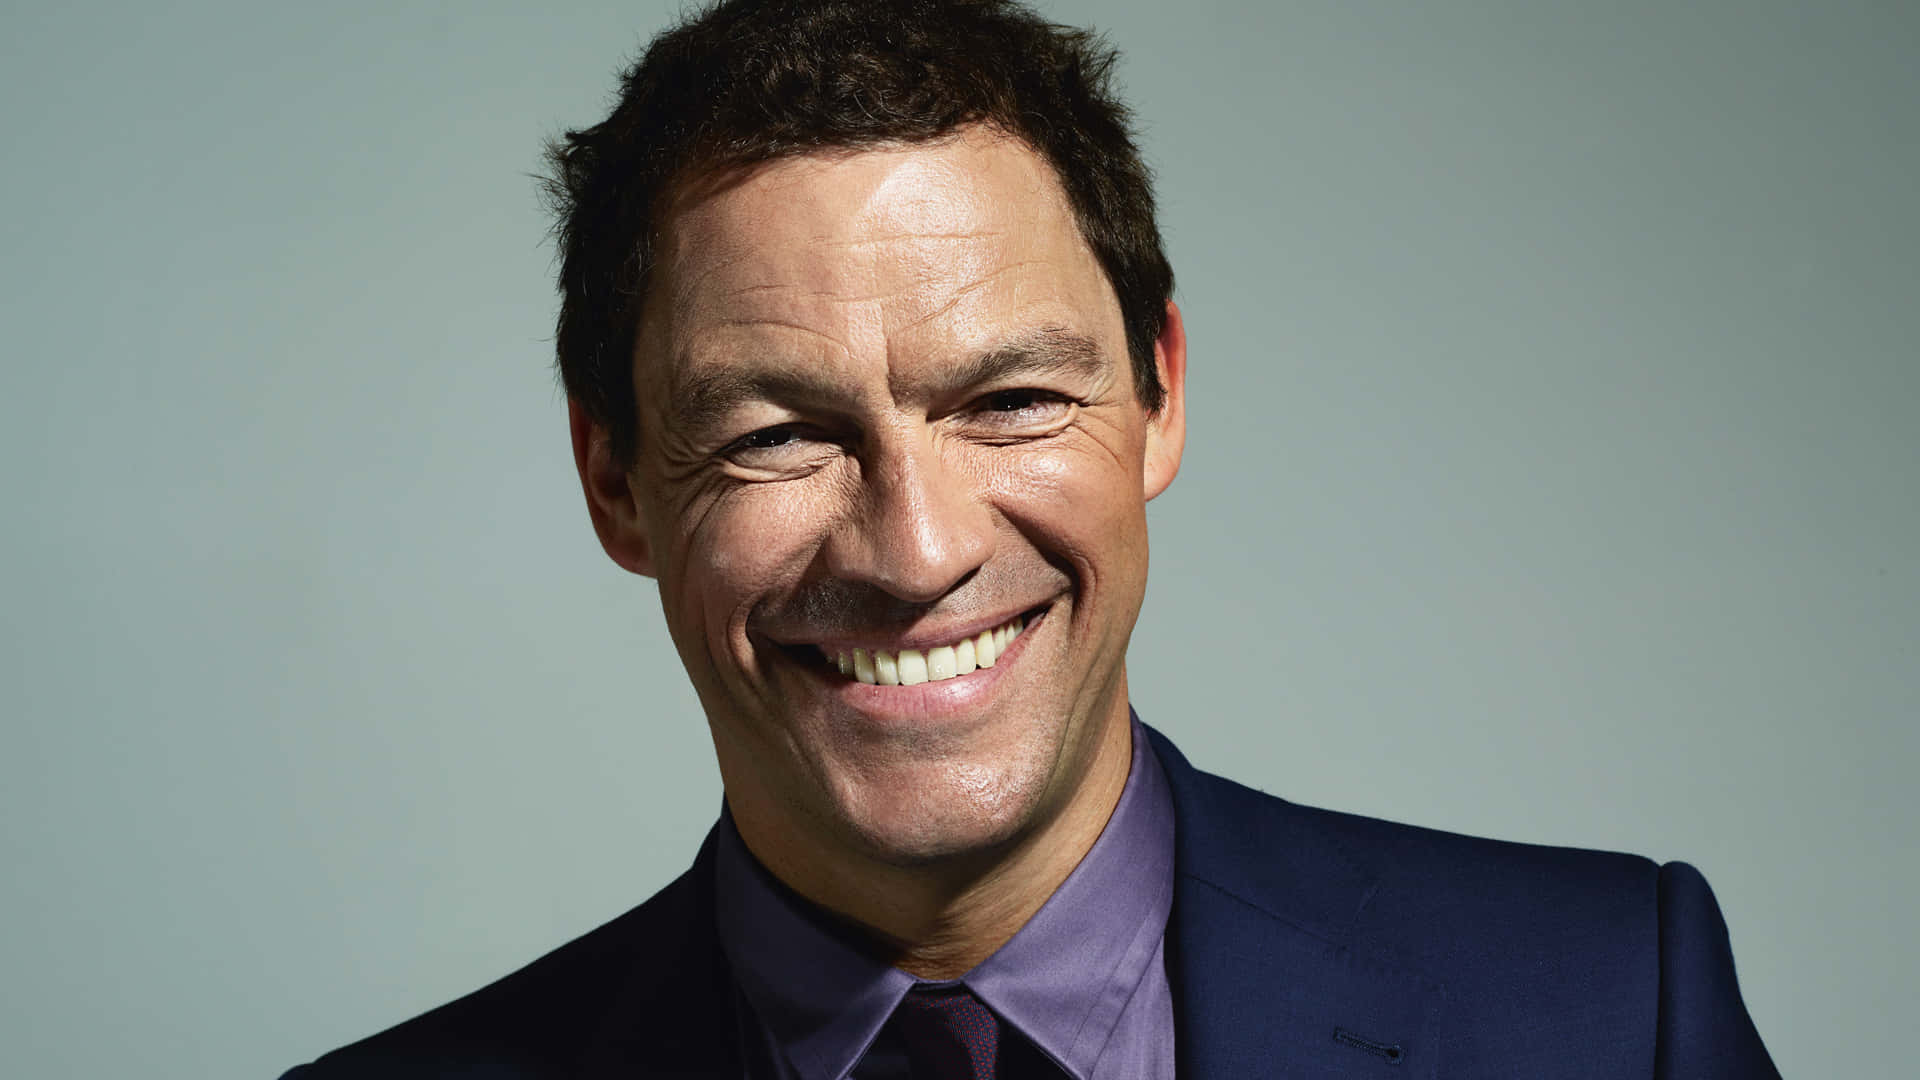 Actor Dominic West striking a pose." Wallpaper